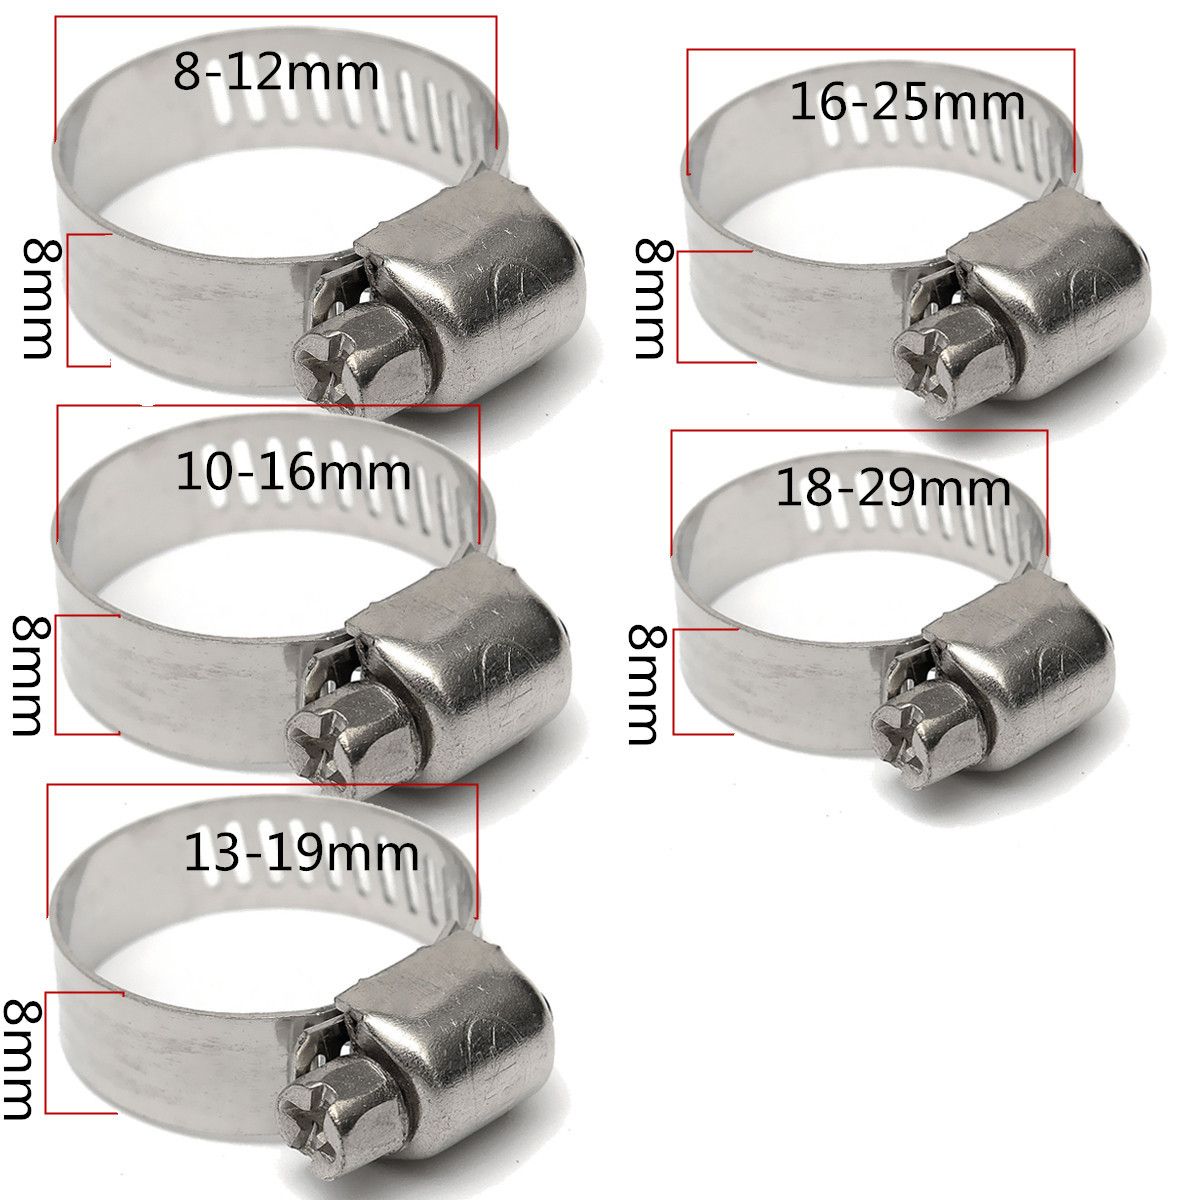 50pcs-5-sizes-Adjustable-Fuel-Line-Jubilee-Hose-Spring-Clamp-Petrol-Pipe-Clips-1046555